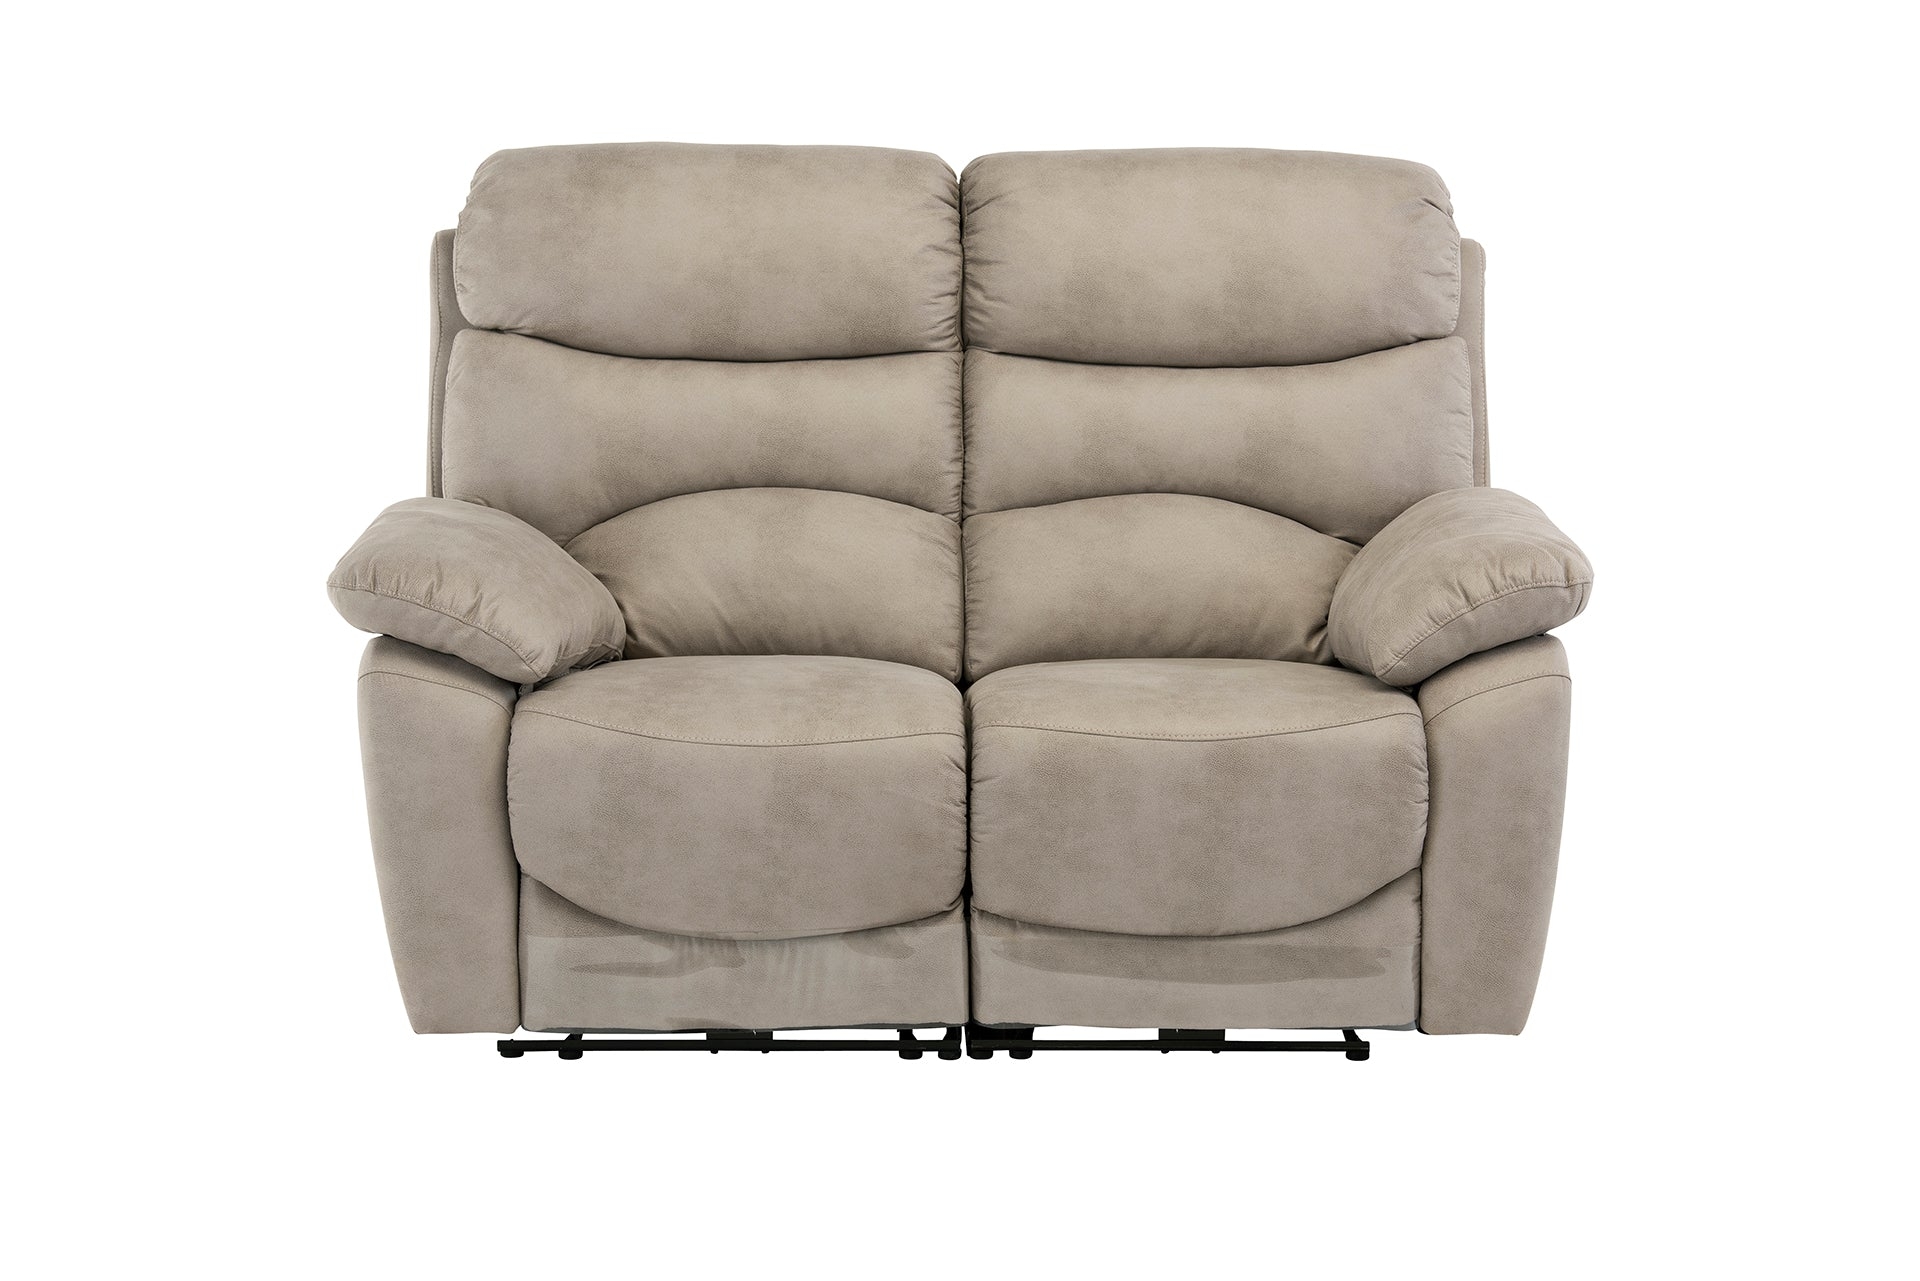 Lola Electric Recliner 2 Seater Sofa – USB Ports, Natural – Lc Living